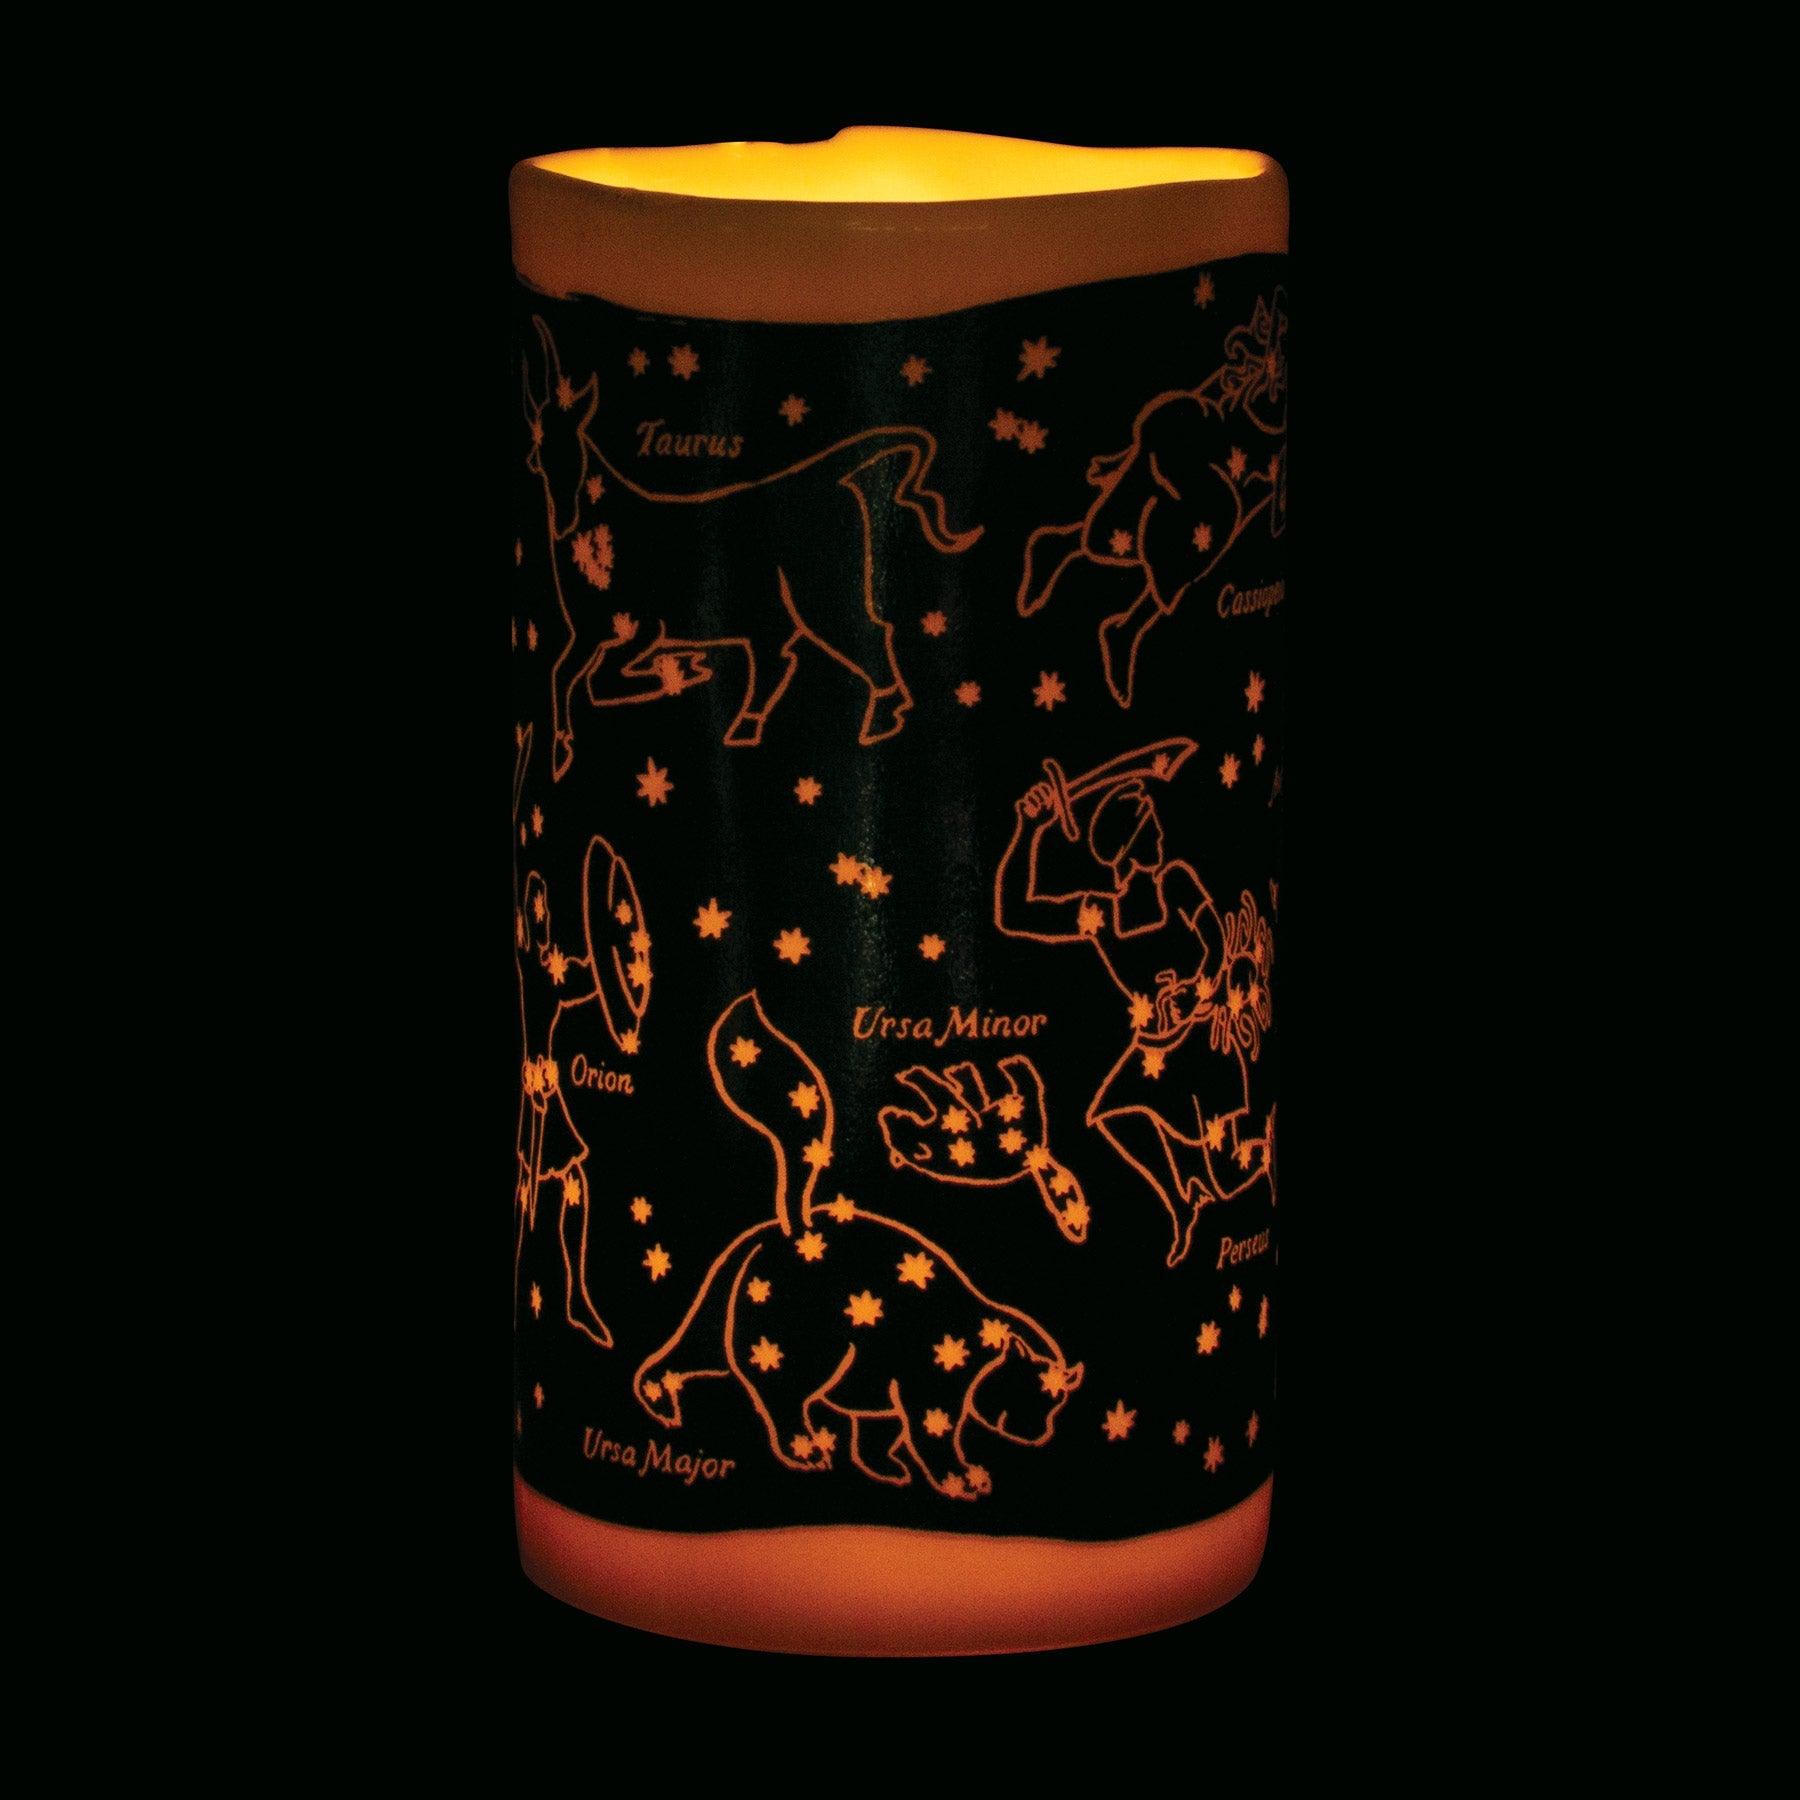 Product photo of Constellations Transforming Tealight Holder, a novelty gift manufactured by The Unemployed Philosophers Guild.